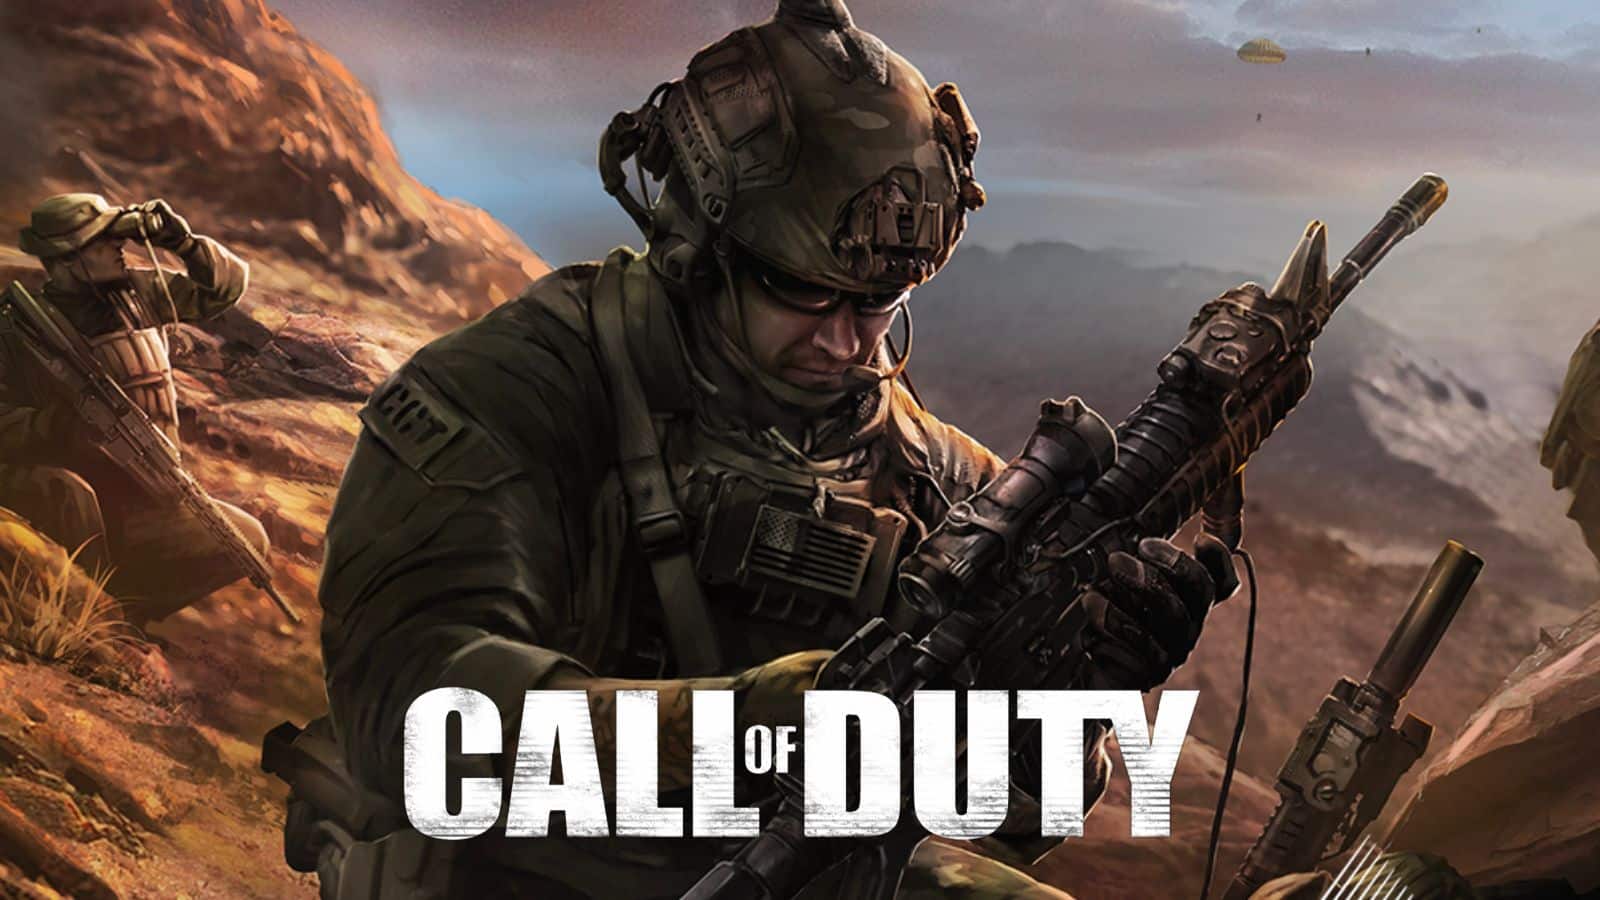 Call of Duty Warzone Mobile will be released in 2022, it's been claimed